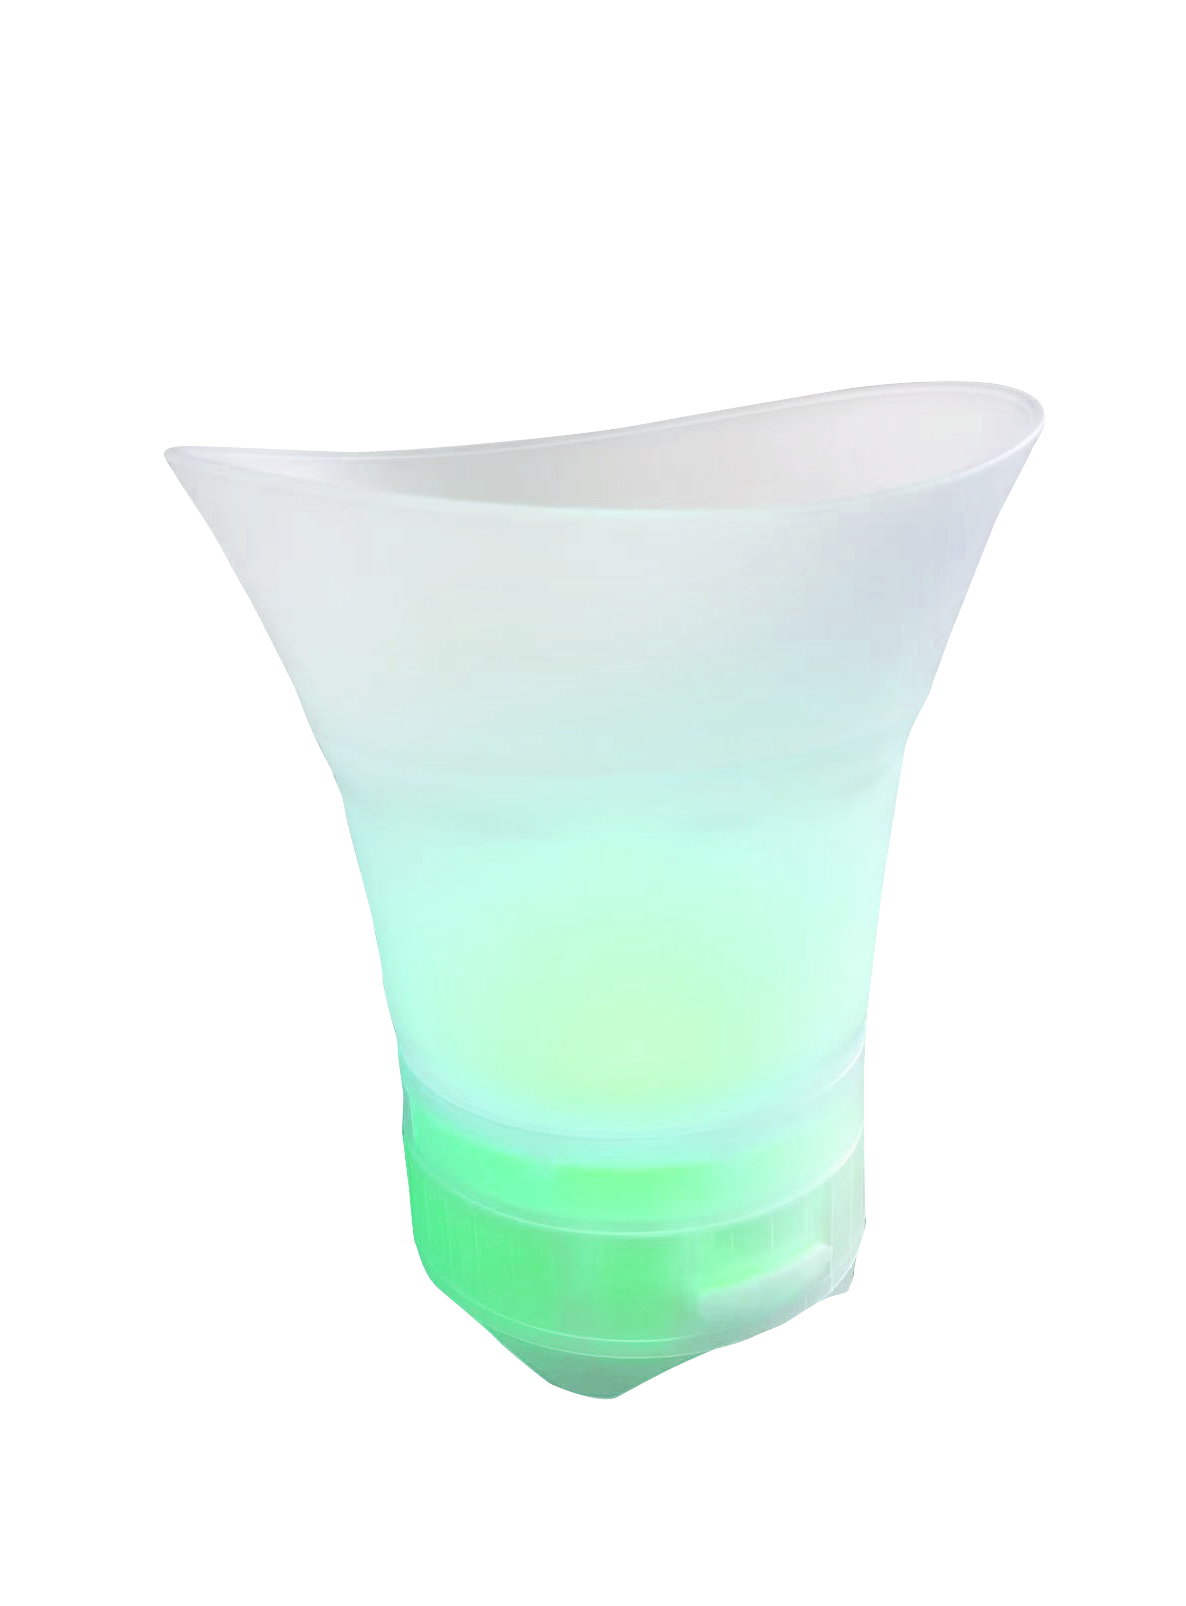 Portable Collapsible Ice bucket -Cooler for Wine, soda, drinks with built In wireless speaker-Party LED lights- Lumi Chill